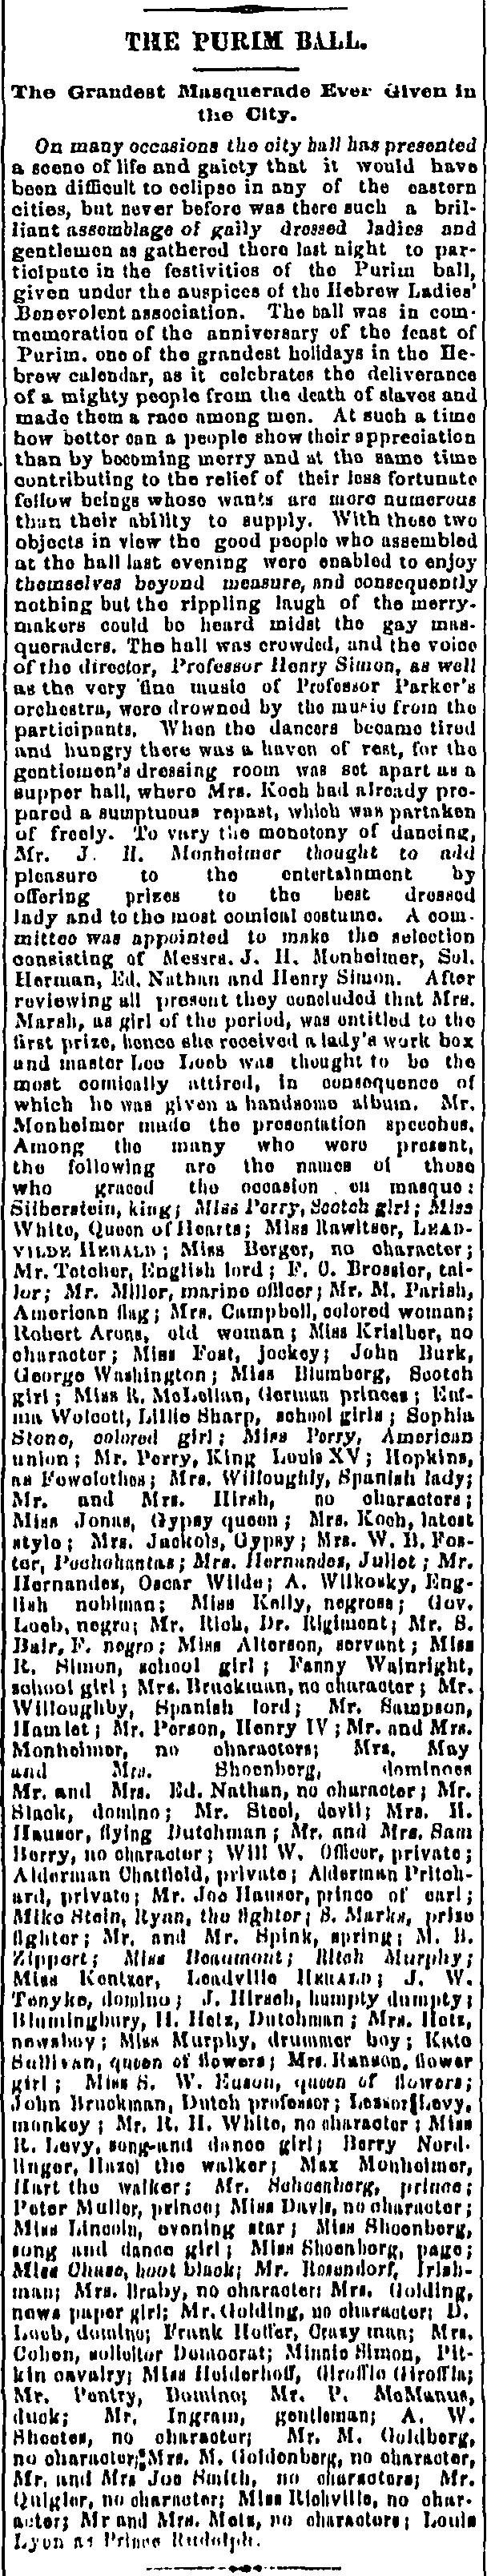 Leadville Daily Herald. Tuesday, March 7, 1882.